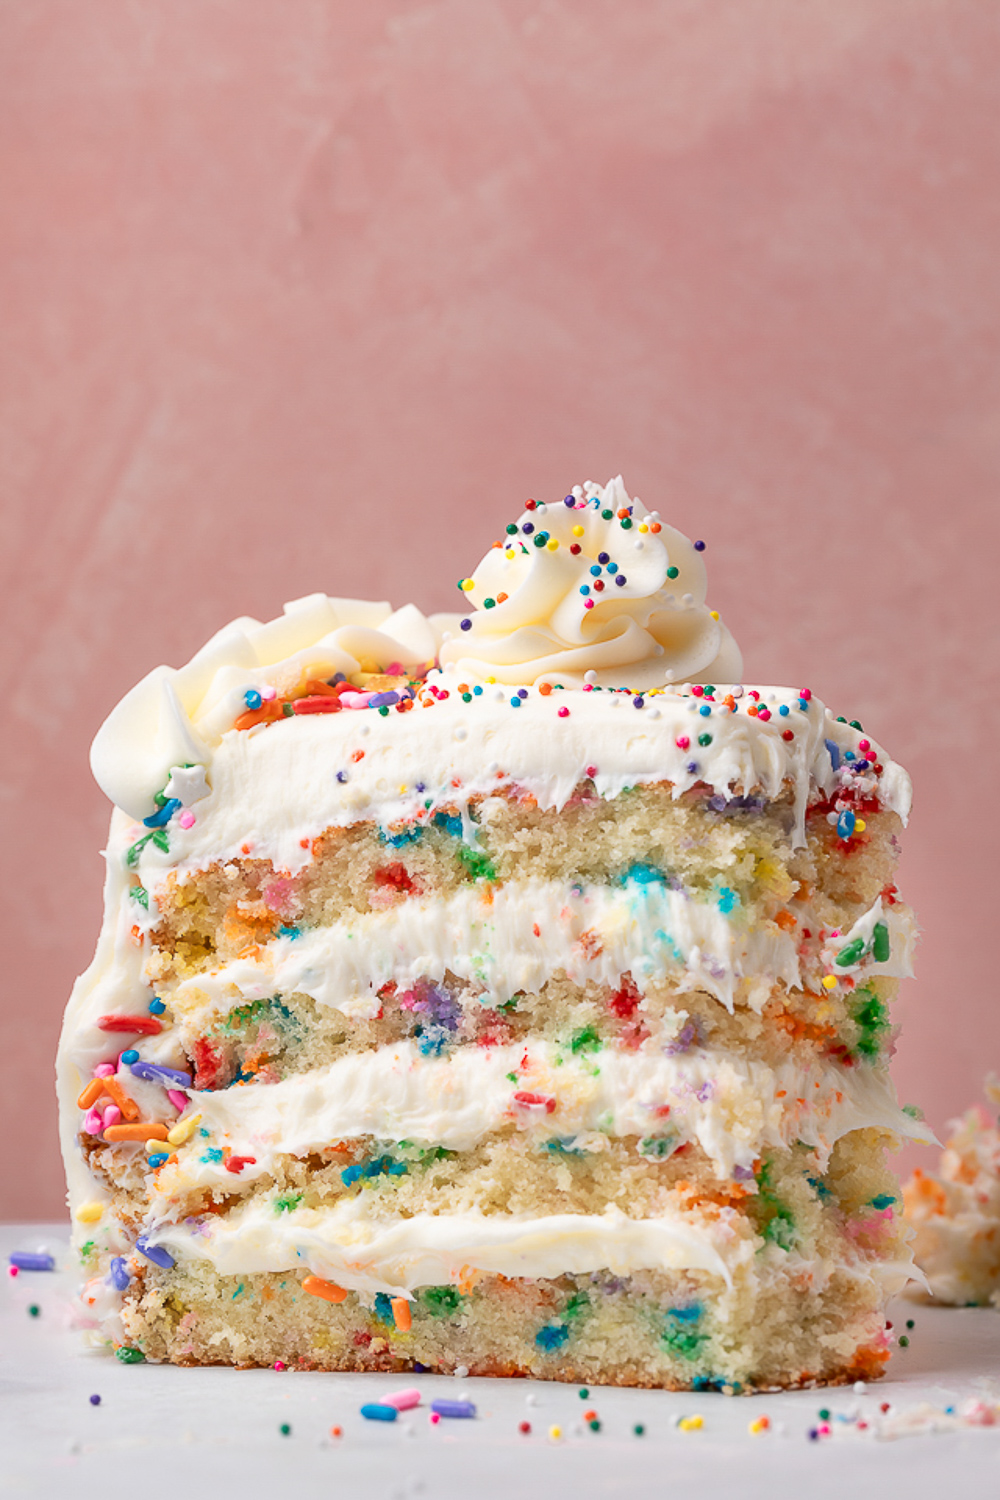 17 Stunning Birthday Cake Recipes for Special Occasions - Baker by ...